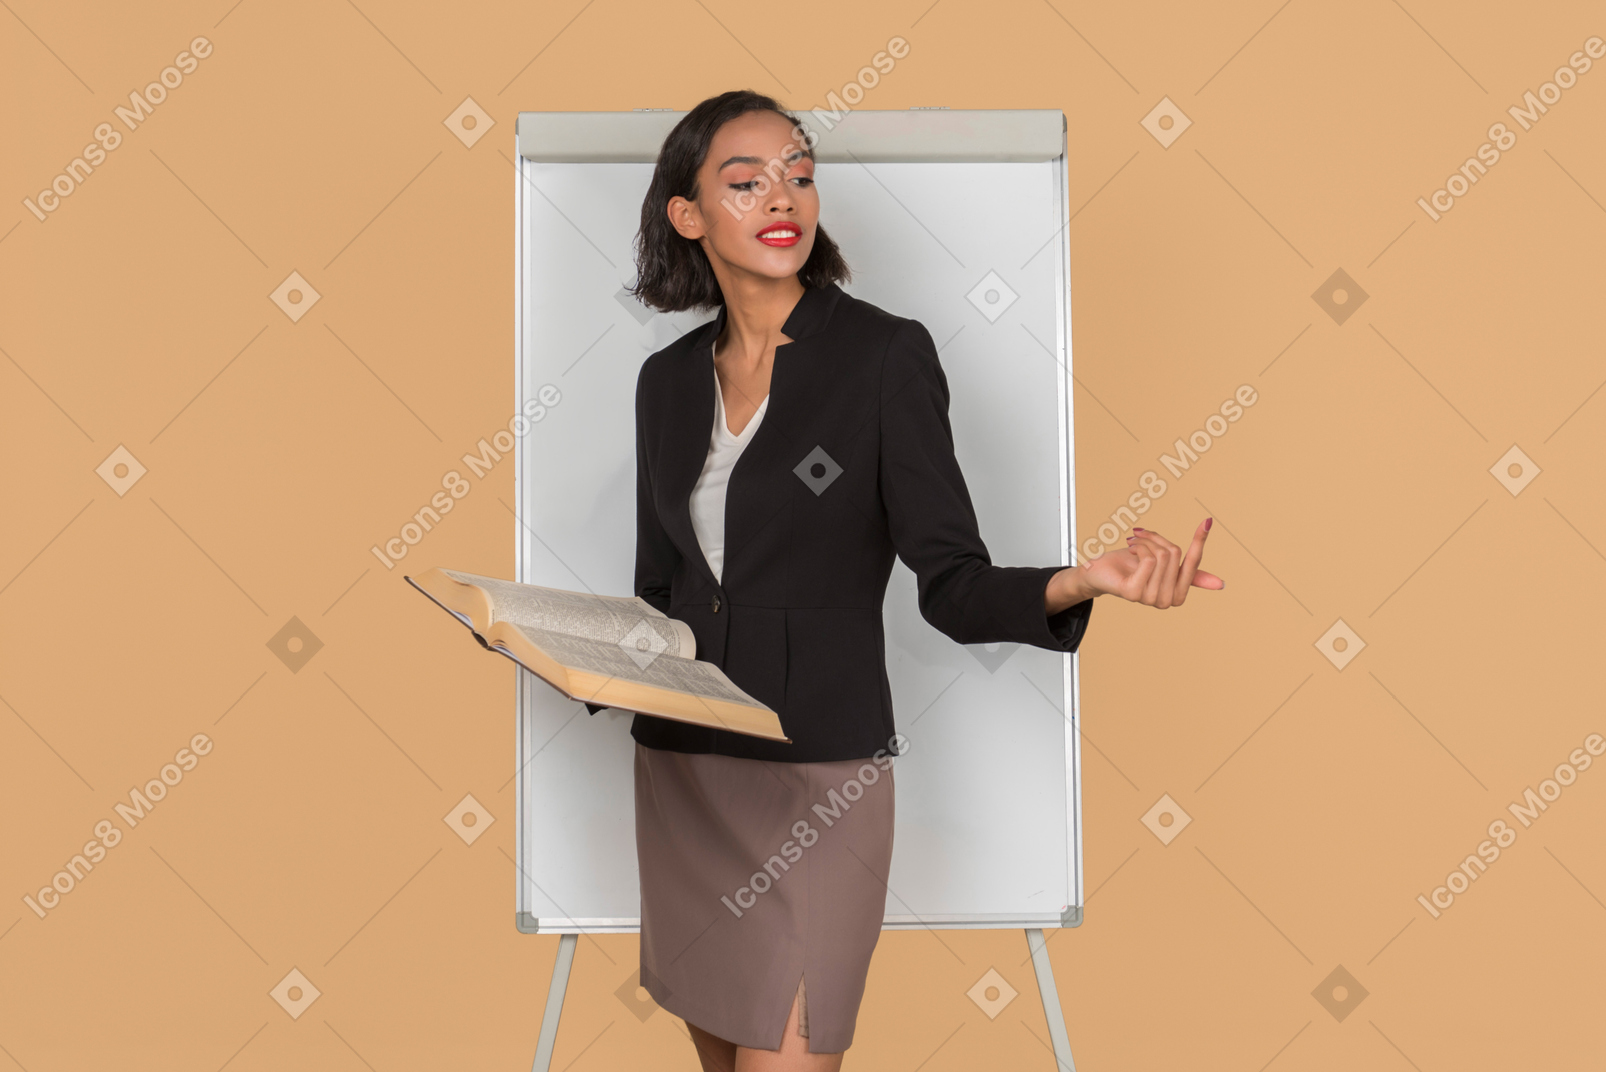 Attractive afro woman standing by the whiteboarding